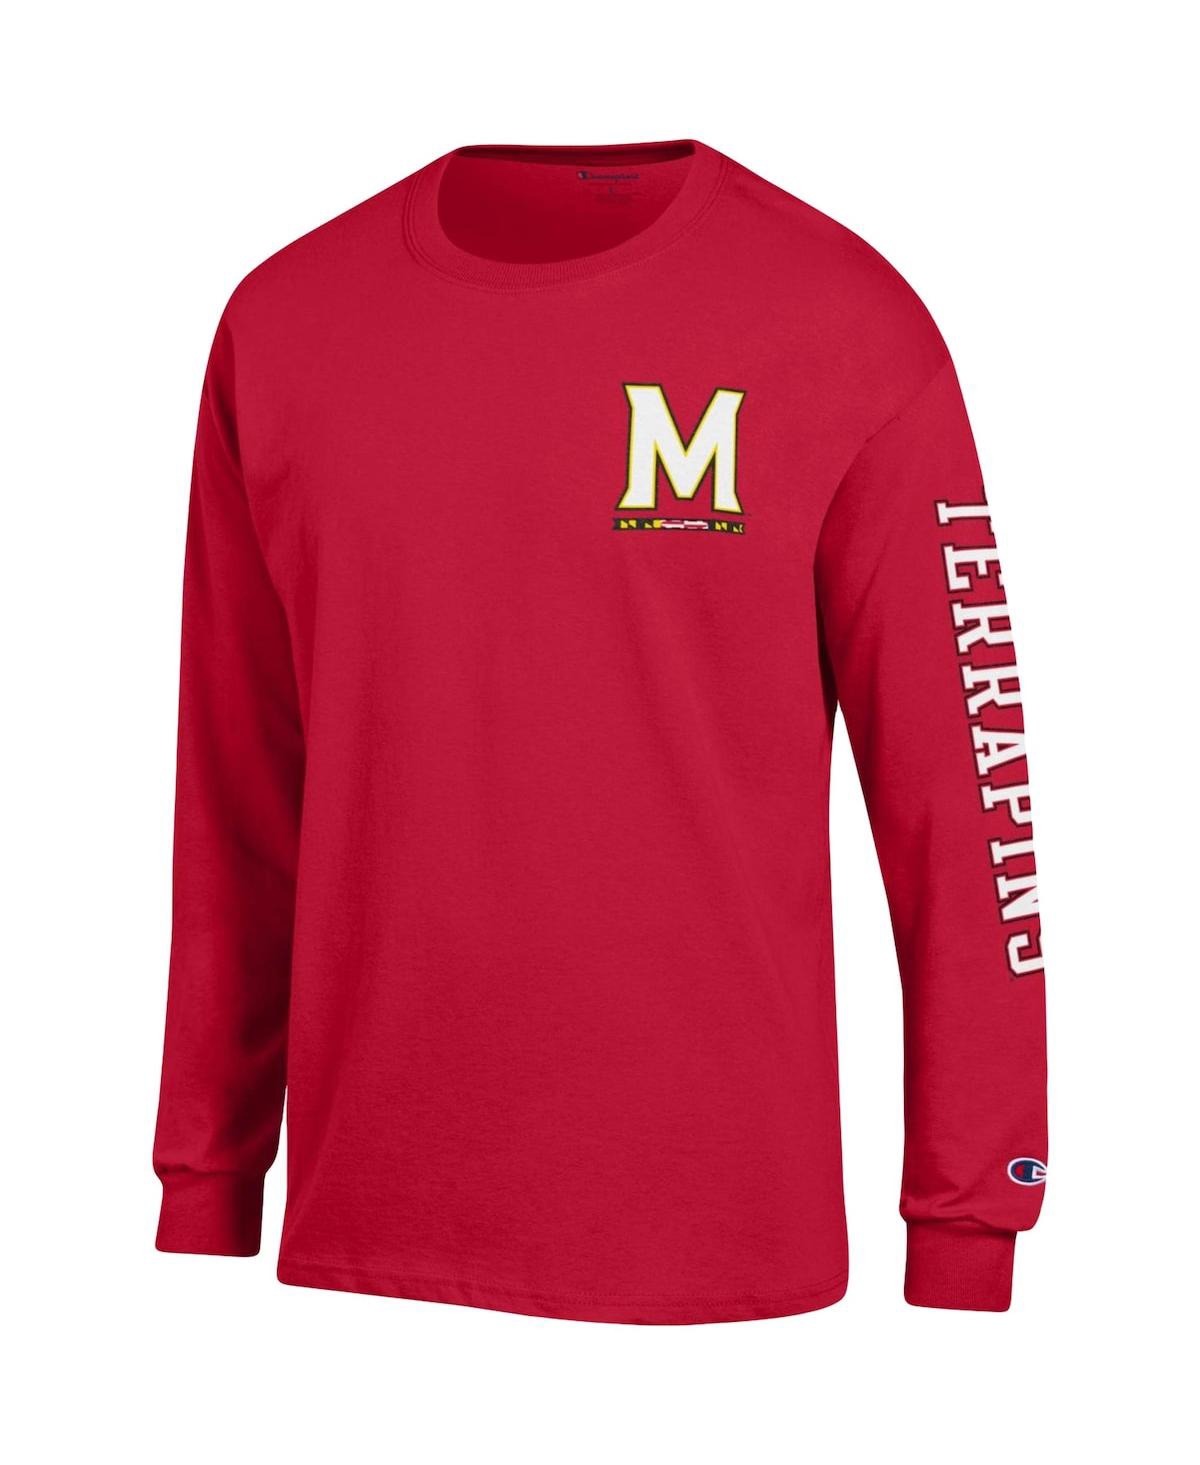 Shop Champion Men's  Red Maryland Terrapins Team Stack Long Sleeve T-shirt